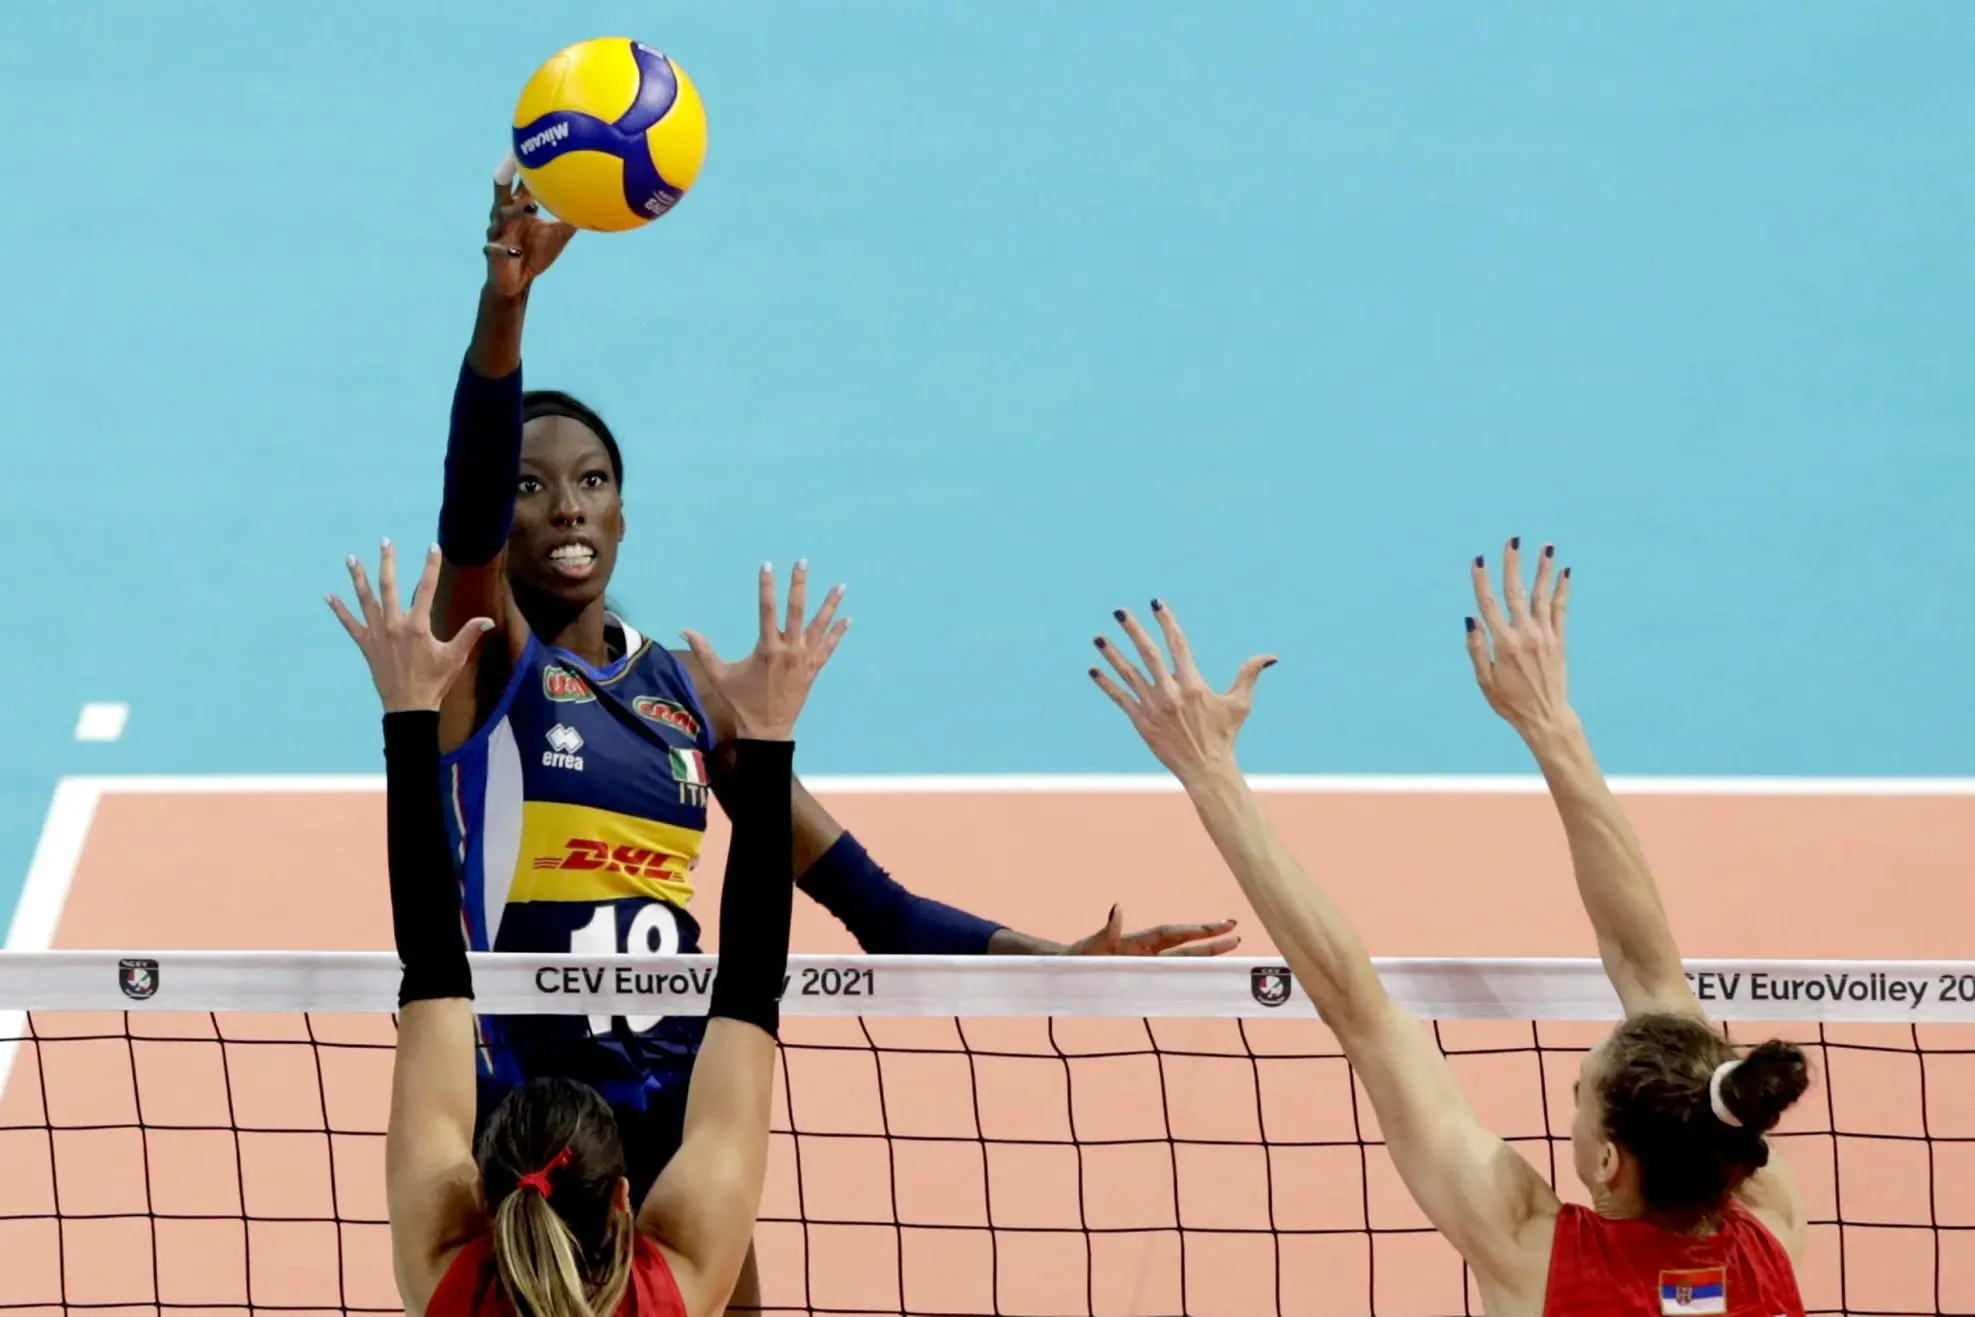 epa09447760 Italy's Paola Ogechi Egonu (back L) in action against Serbian players Katarina Lazovic (front L) and Mina Popovic (R) during the 2021 Women's European Volleyball Championship final between Serbia and Italy in Belgrade, Serbia, 04 September 2021. EPA/ANDREJ CUKIC